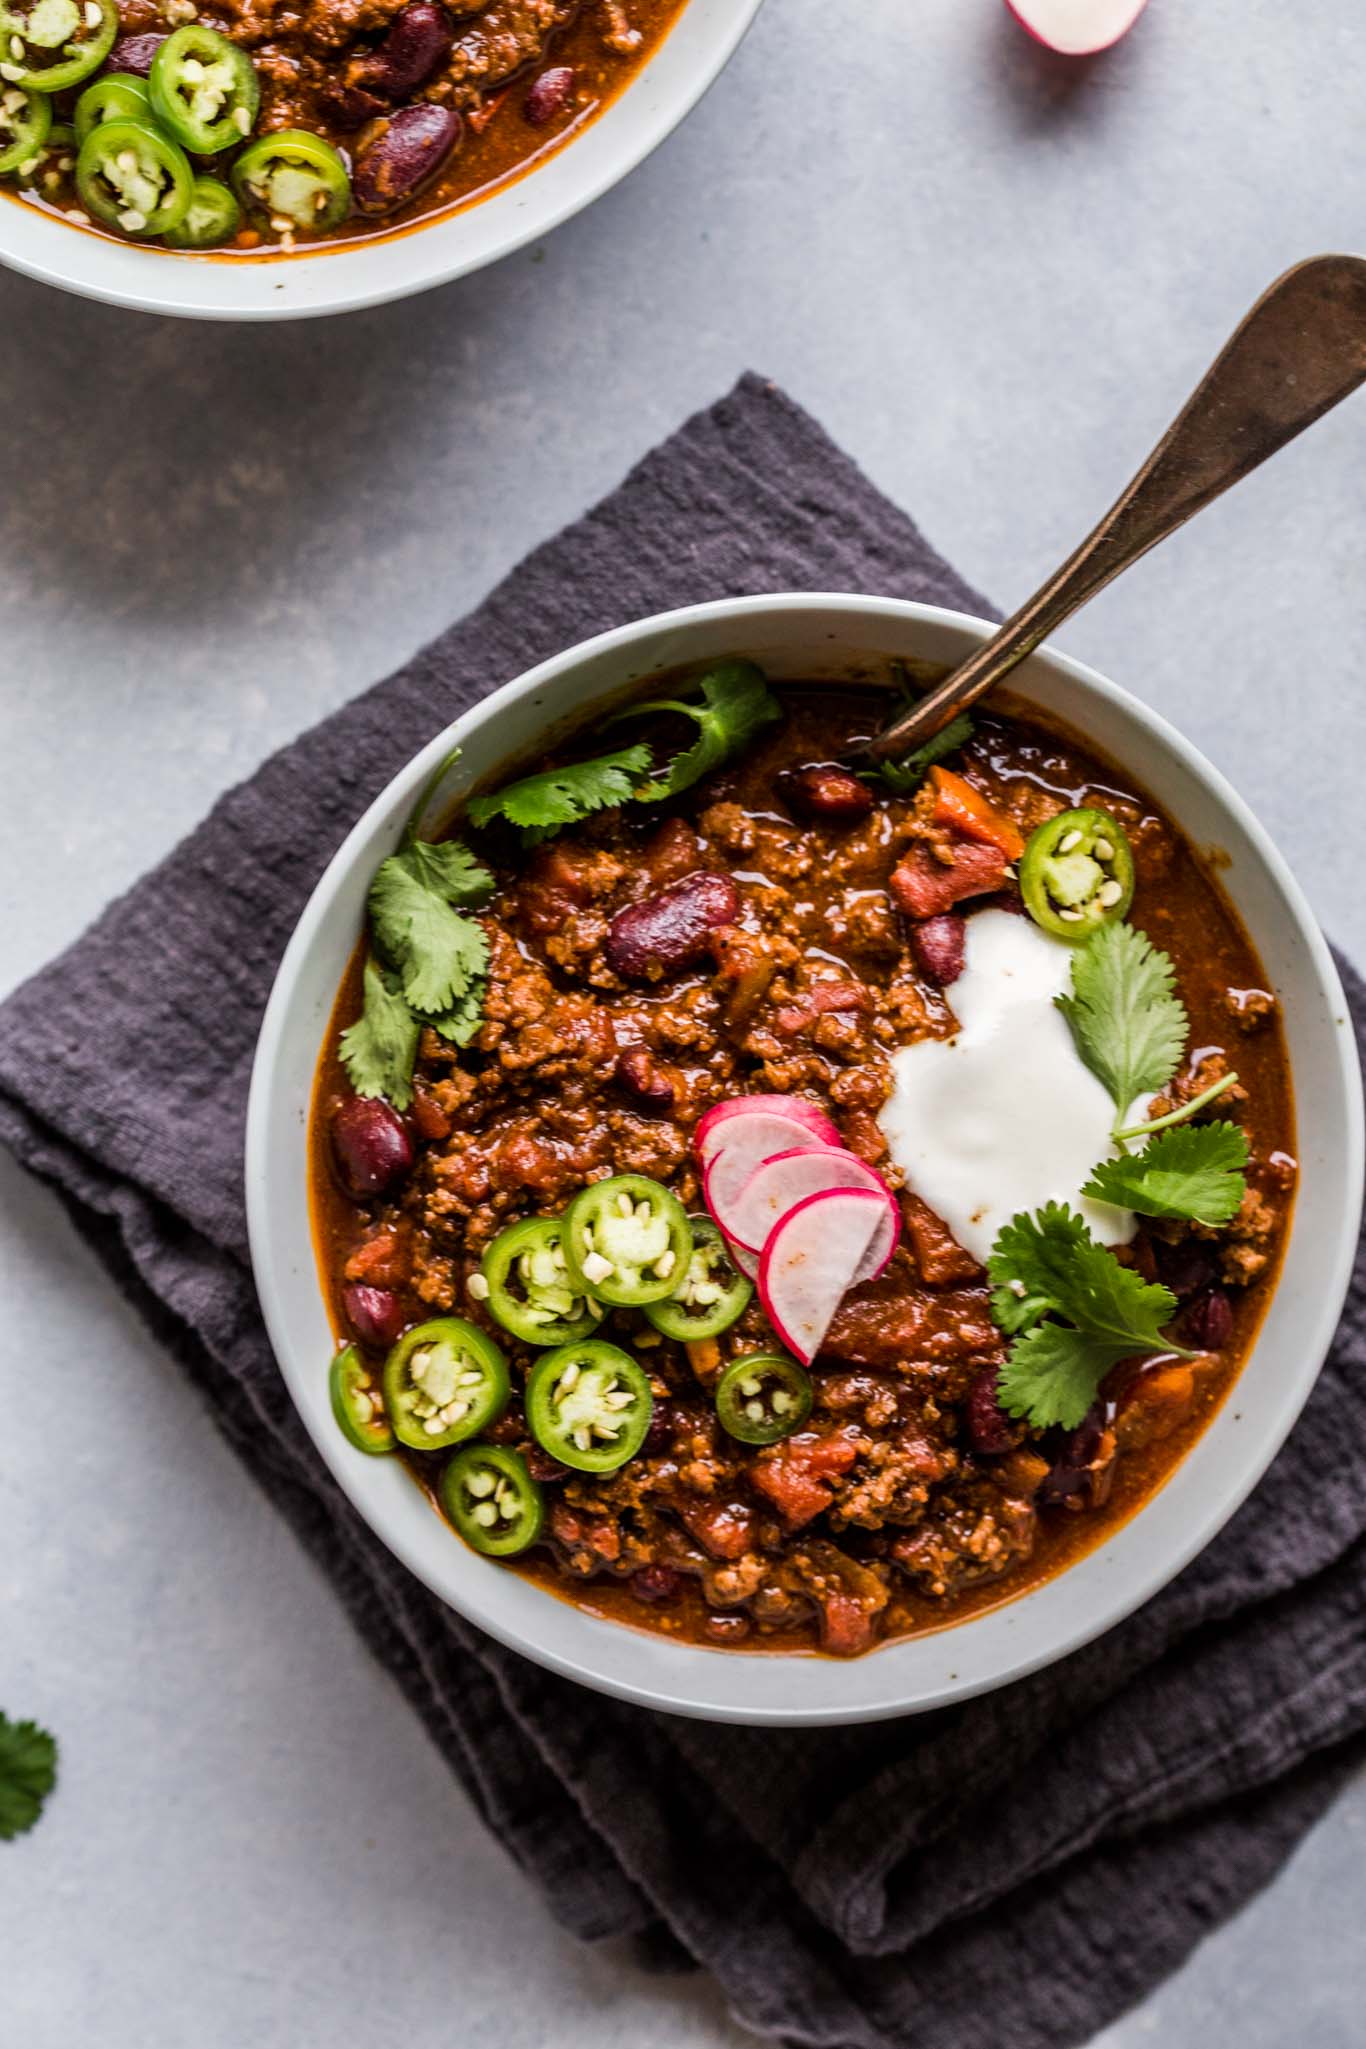 My Spicy Beef & Beer Chili is a hearty one-pot chili that’s rich and spicy and perfect for chilly nights.